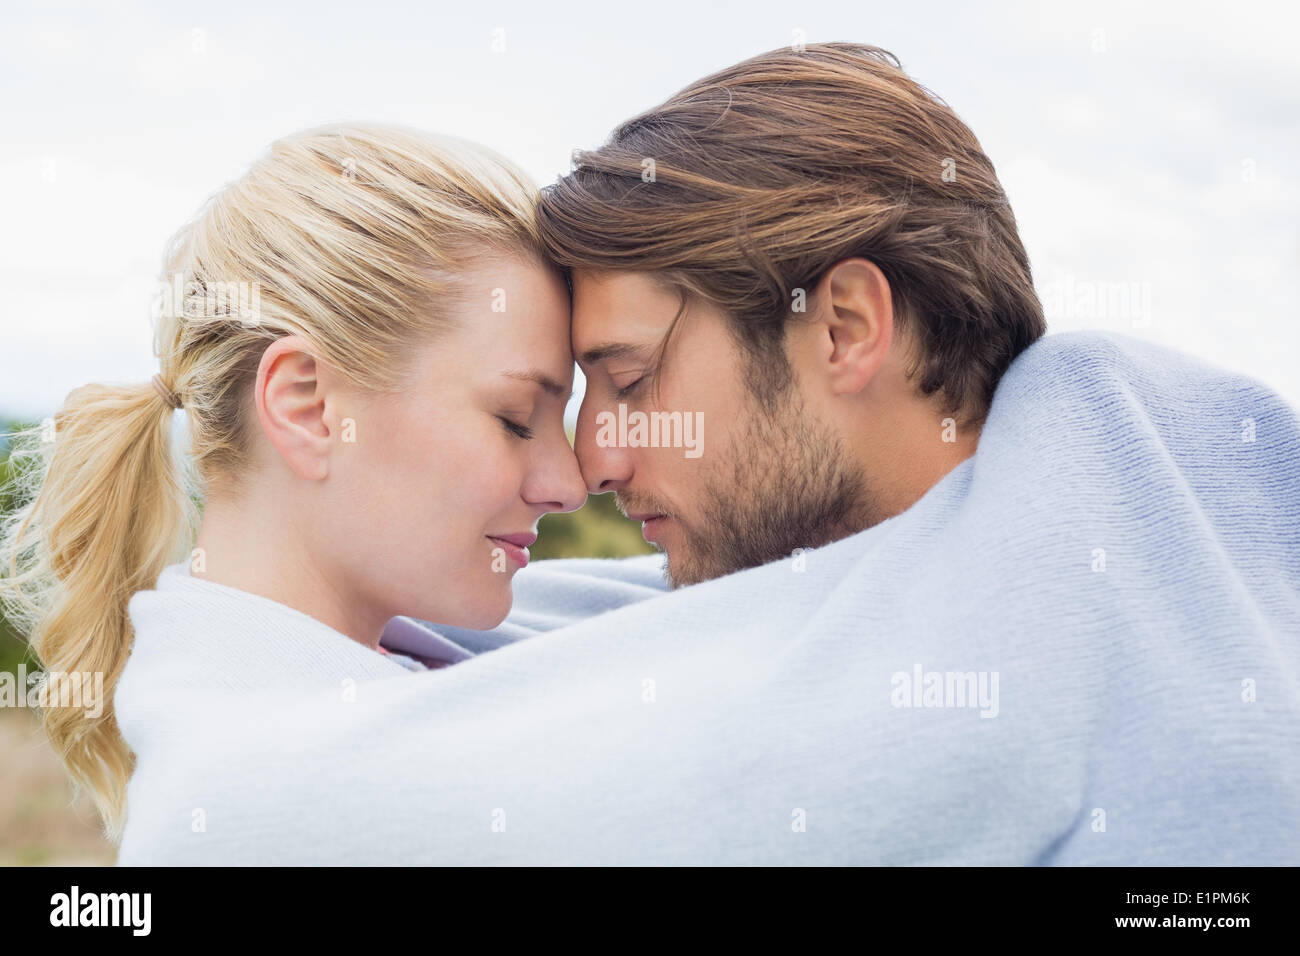 Cute affectionate couple standing outside wrapped in blanket Stock Photo